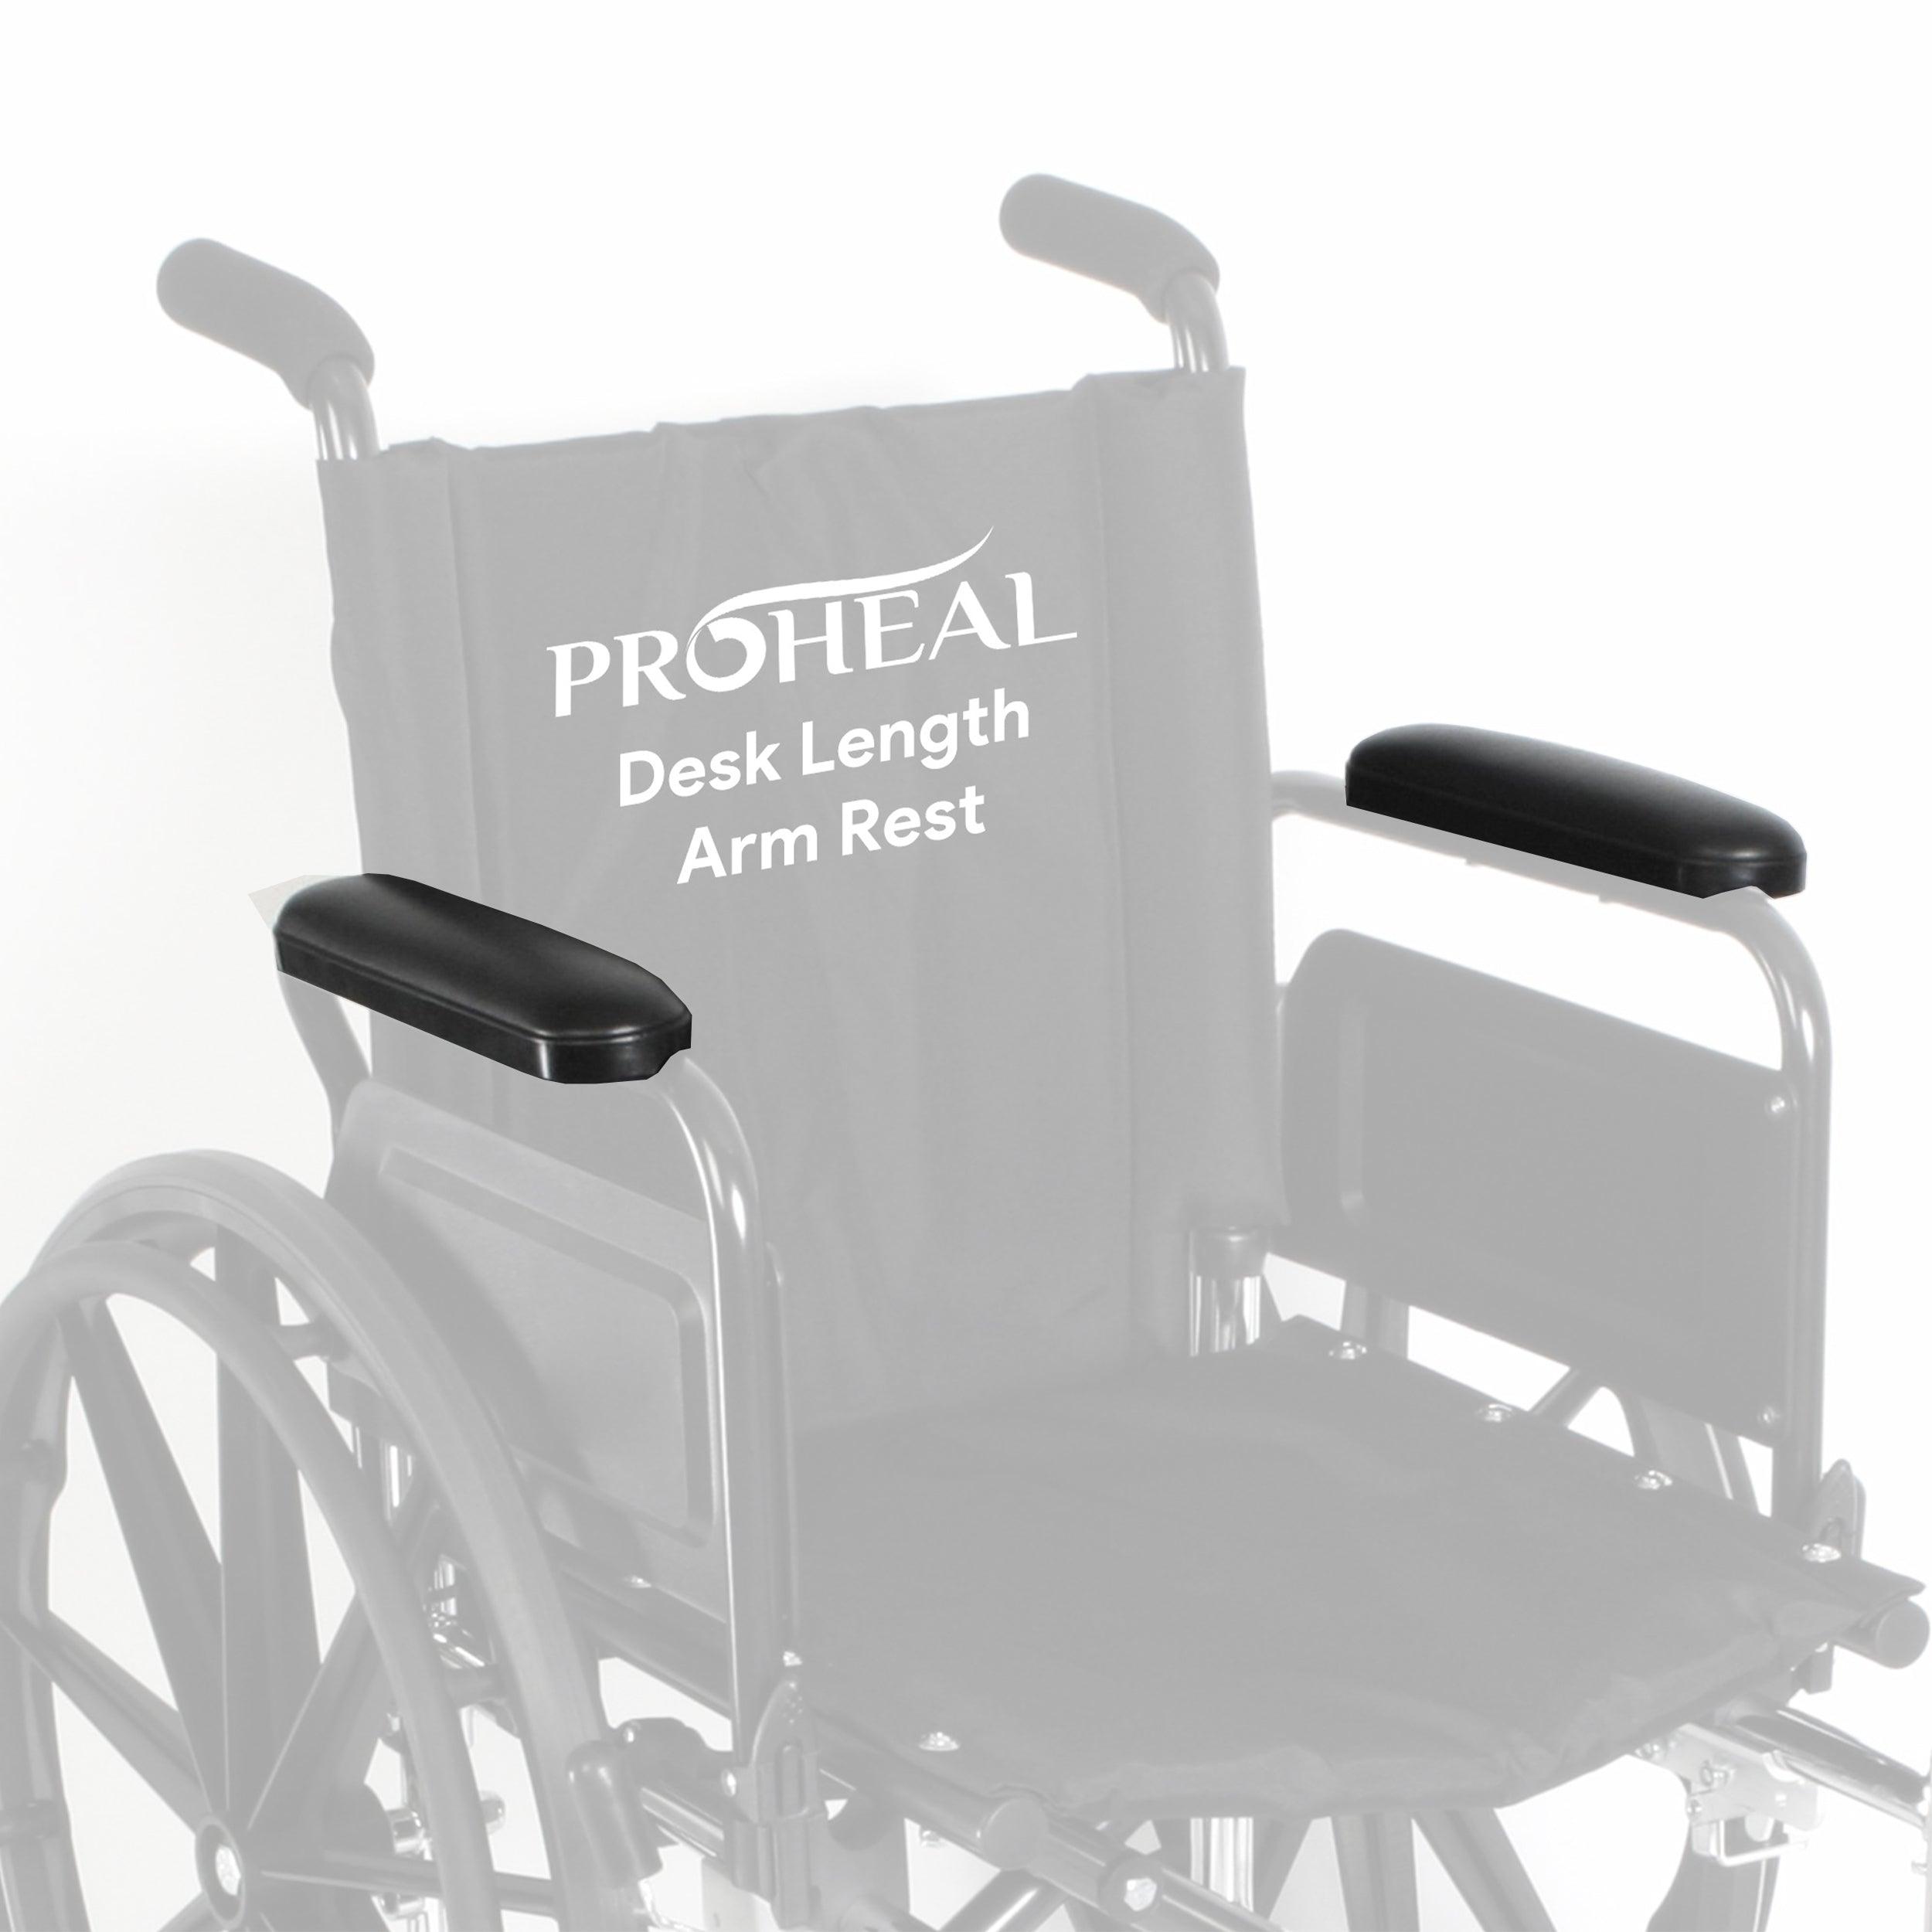 http://prohealproducts.com/cdn/shop/files/desk-length-wheelchair-armrest-proheal-products-1.jpg?v=1689334973